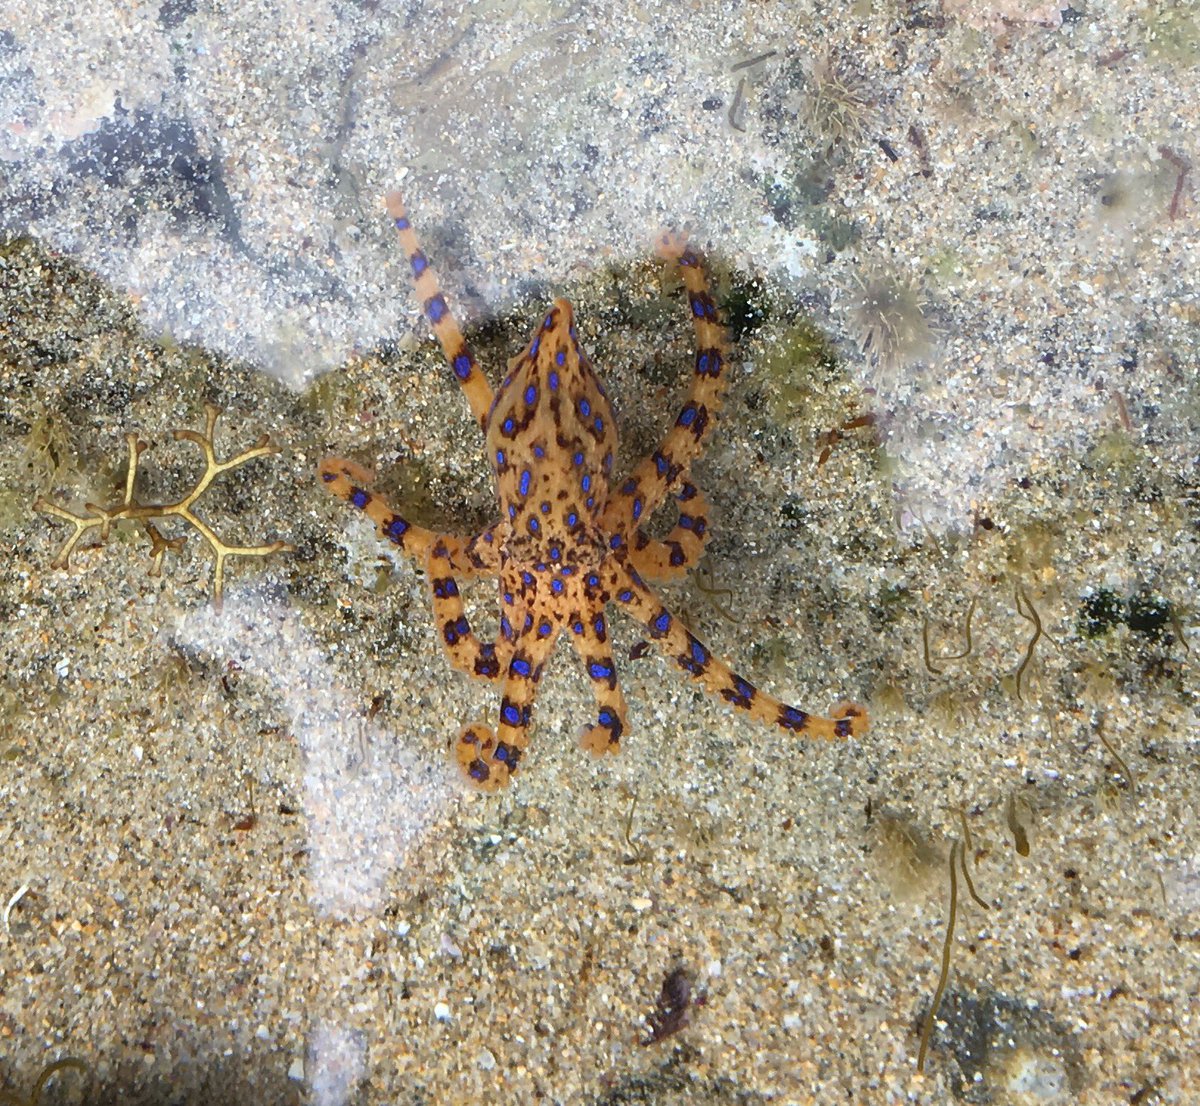 Pretty pumped to see this bad boy in my #rockpoolramble at #marengo today!! #blueringoctopus #parksVic #ApolloBayCollege #watchyafingers